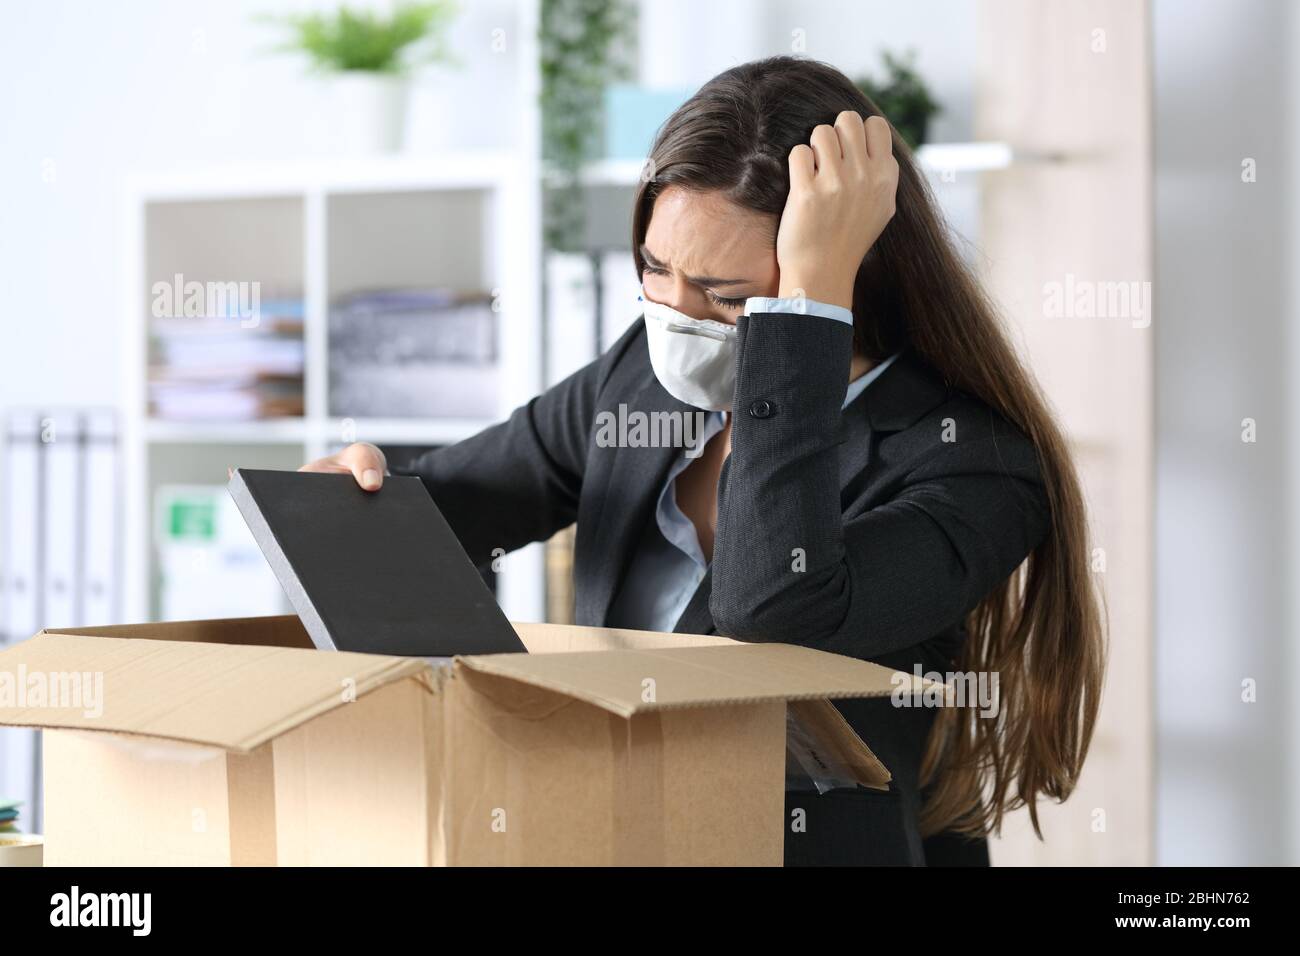 Sad fired executive woman with protective mask packing personal belongings on a box at the office Stock Photo